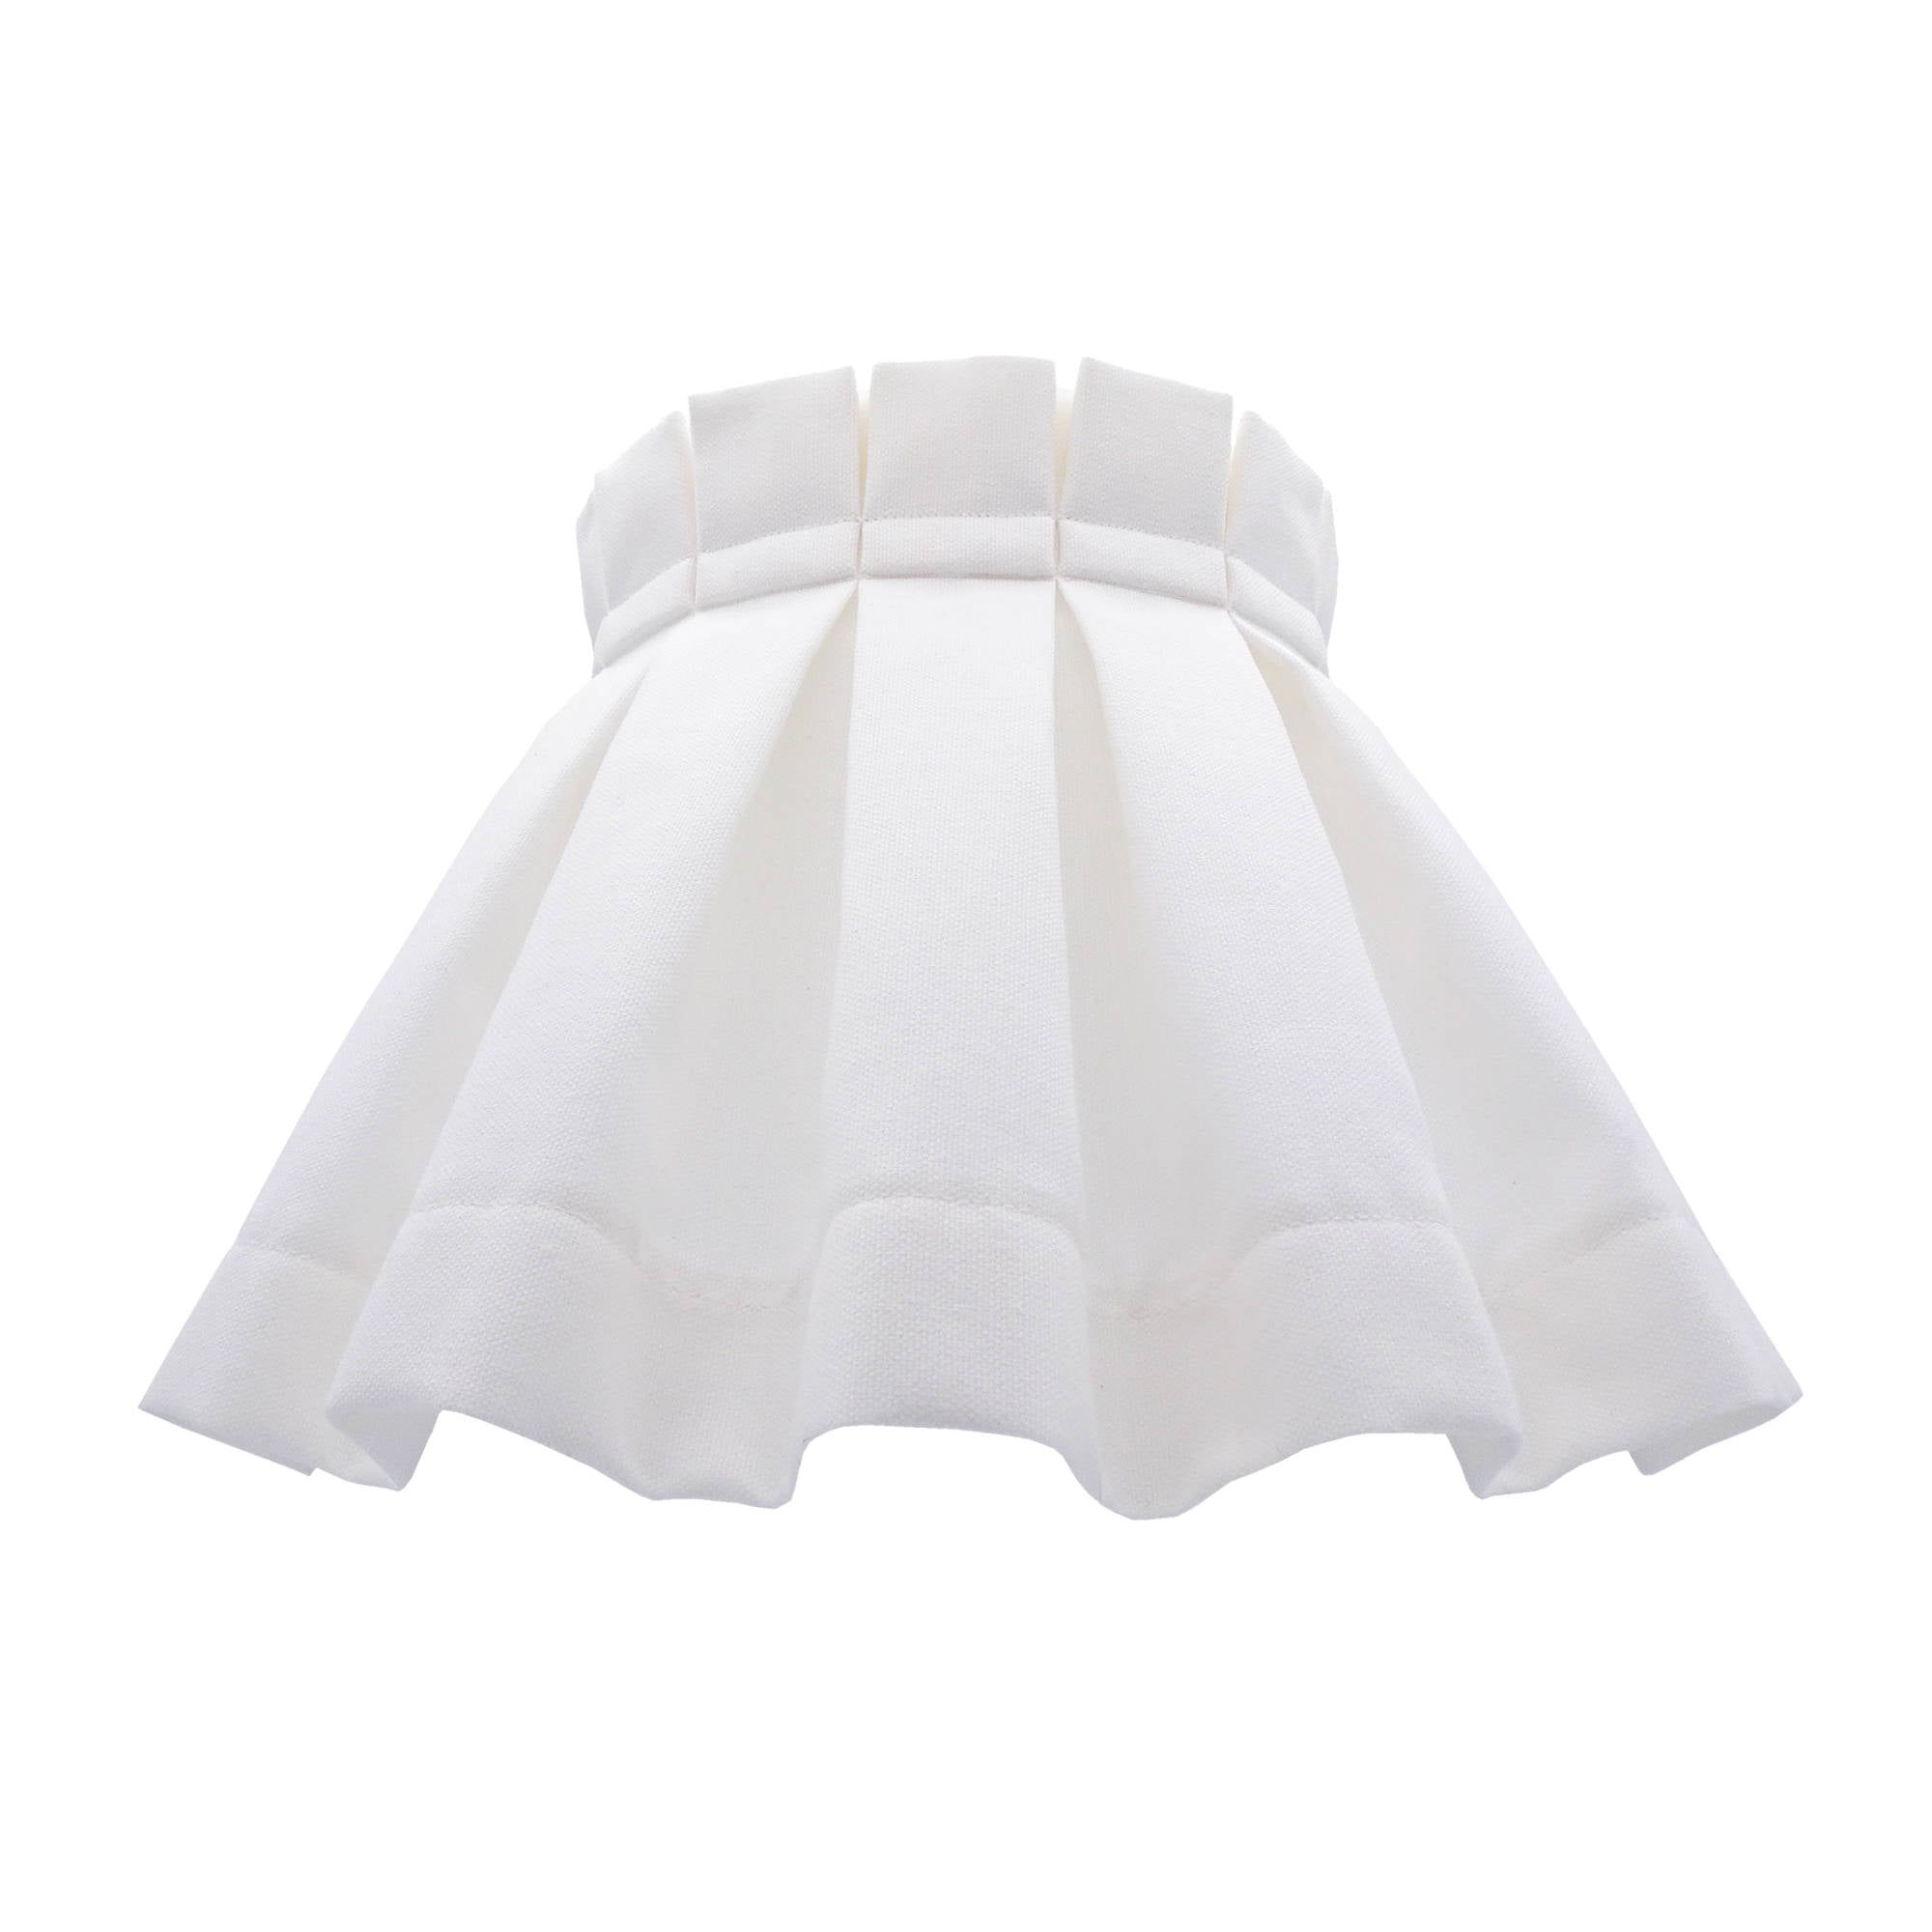 SOLID RELAXED BOX PLEAT LAMPSHADE | WHITE